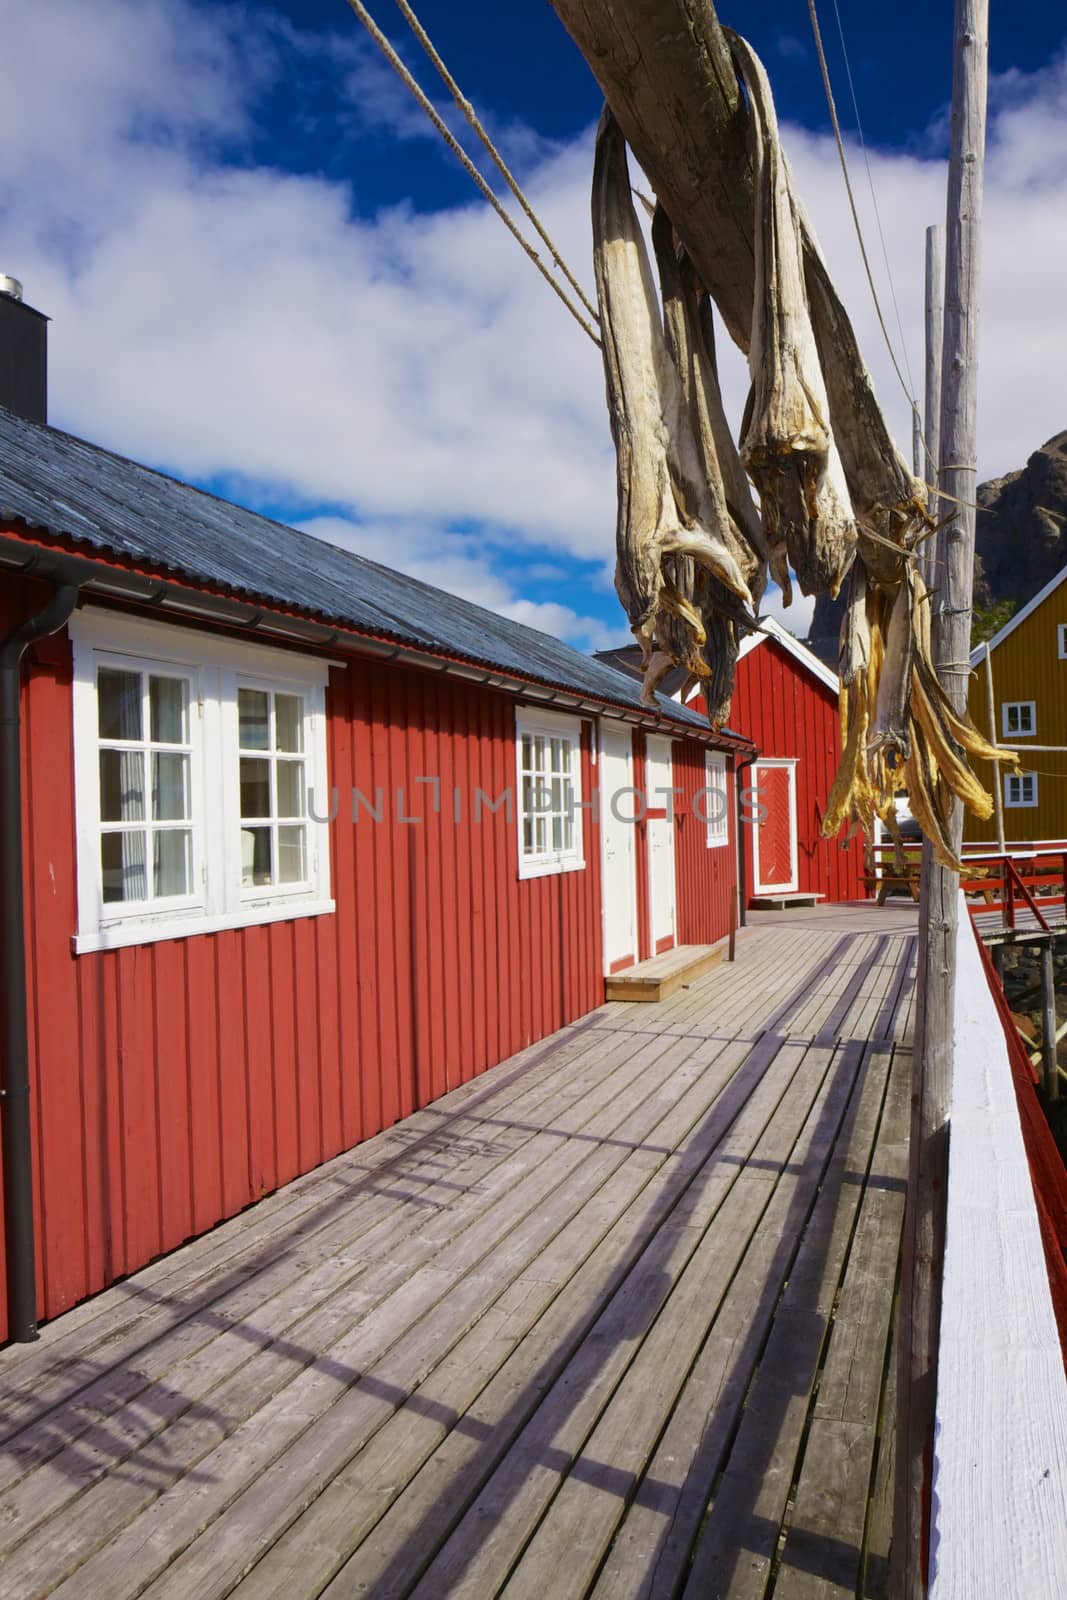 Traditional fishing hut and dried stock fish in Nusfjord on Lofoten islands, Norway